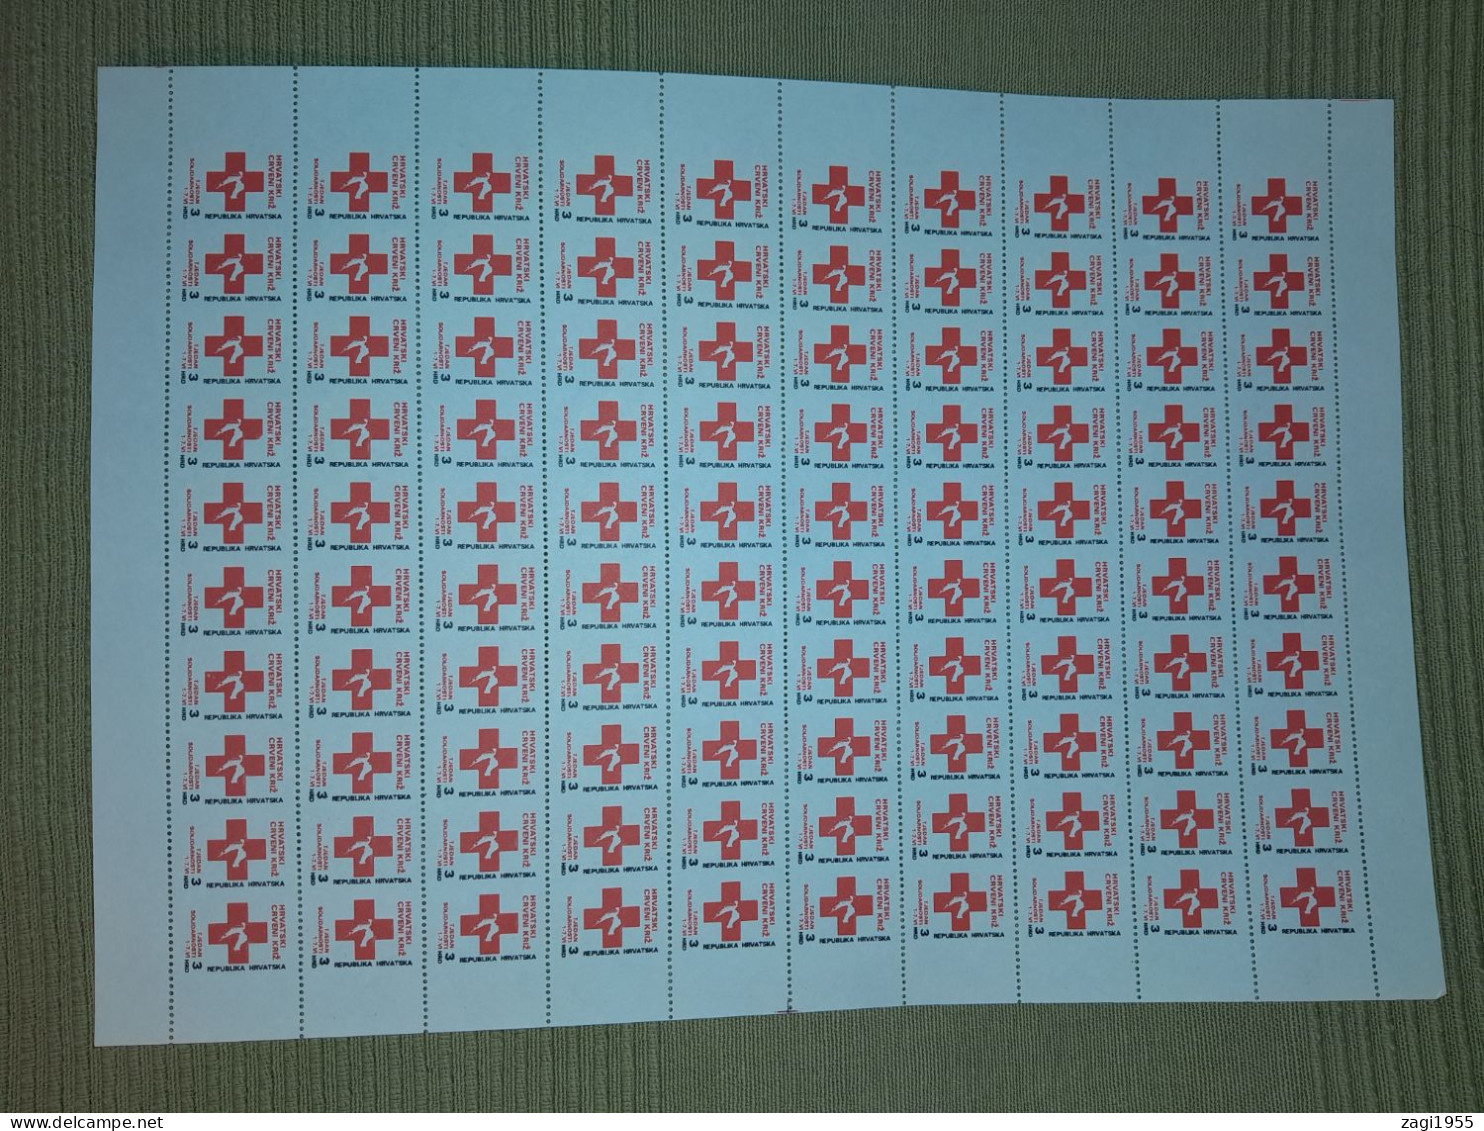 Croatia 1992 Sheet Red Cross Solidarity One Half IMPERFORATED, Perforated Only Horisontally - Croatie